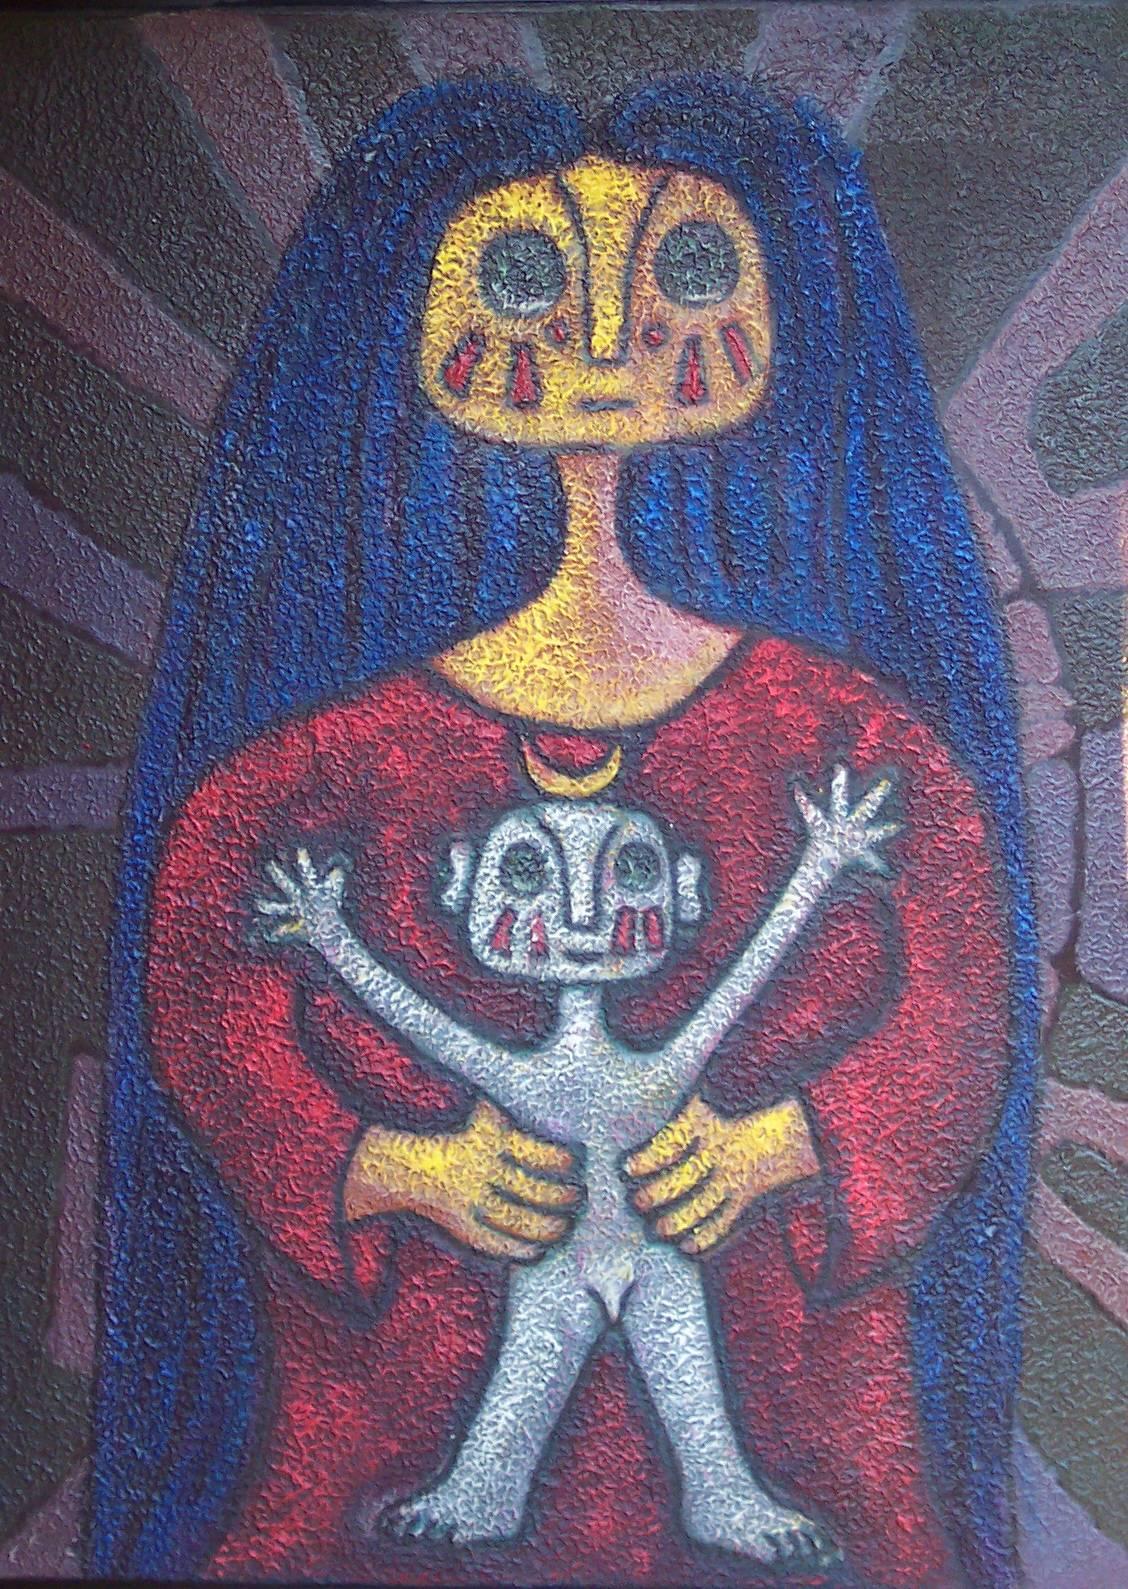 A Caminar II (To Walk II - Mother & Child) Surrealist - Painting by Hector Najera